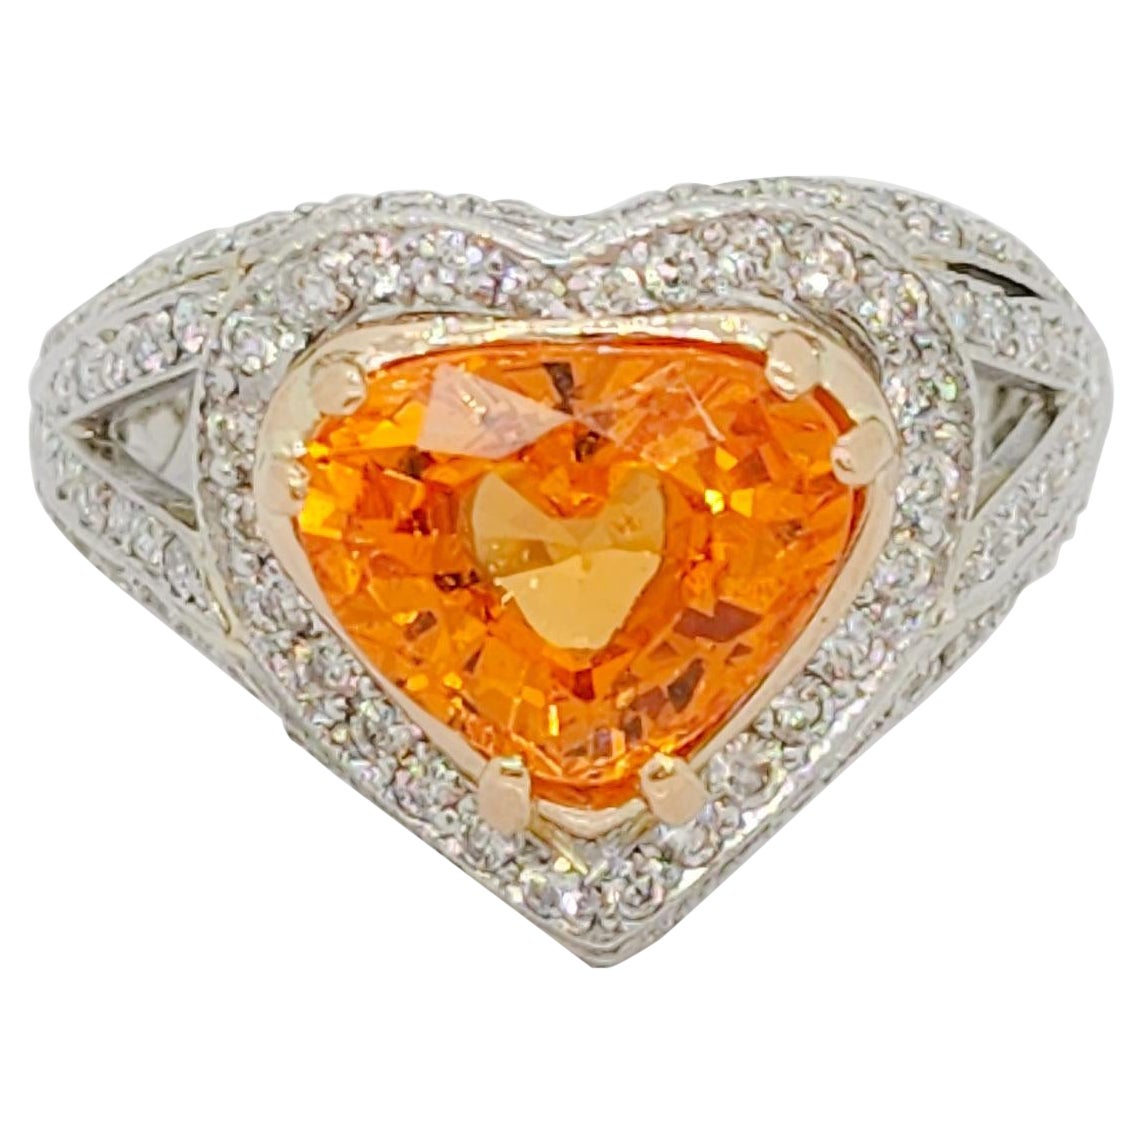 Mandarin Garnet and White Diamond Cocktail Ring in Platinum and 18k Yellow Gold For Sale